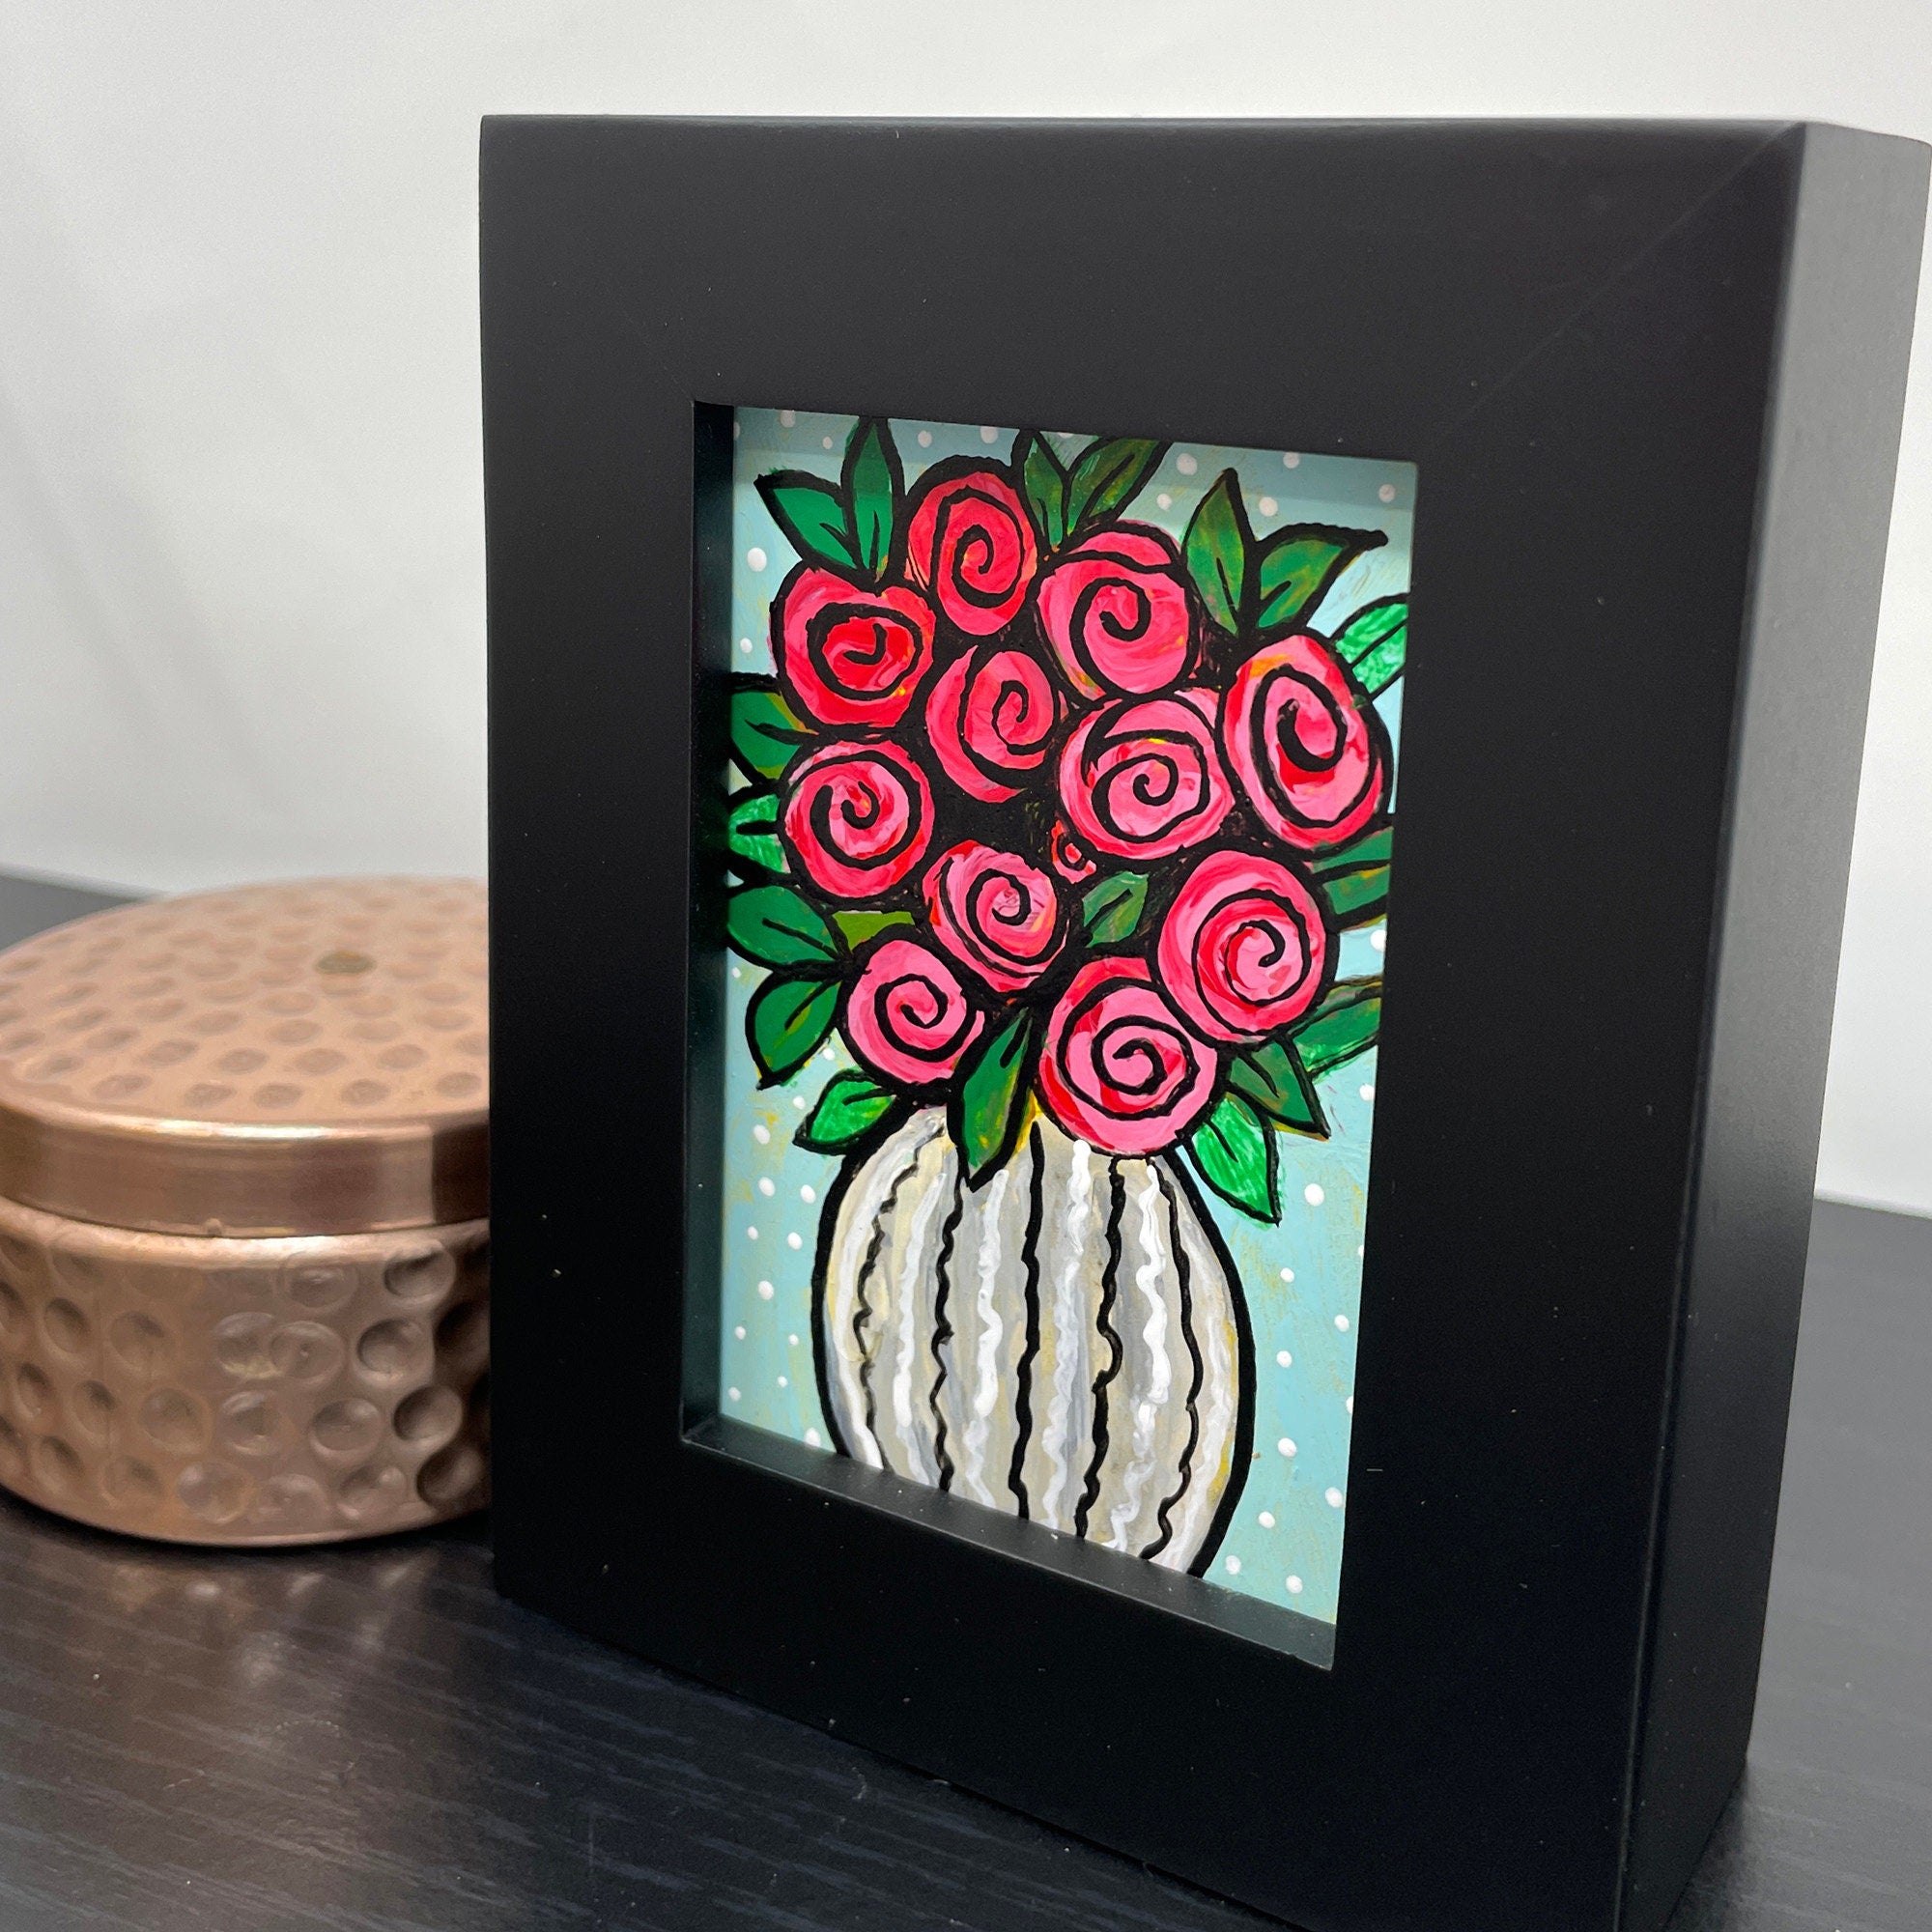 Side view of Vase of Roses in black painting sitting on black table with copper box.